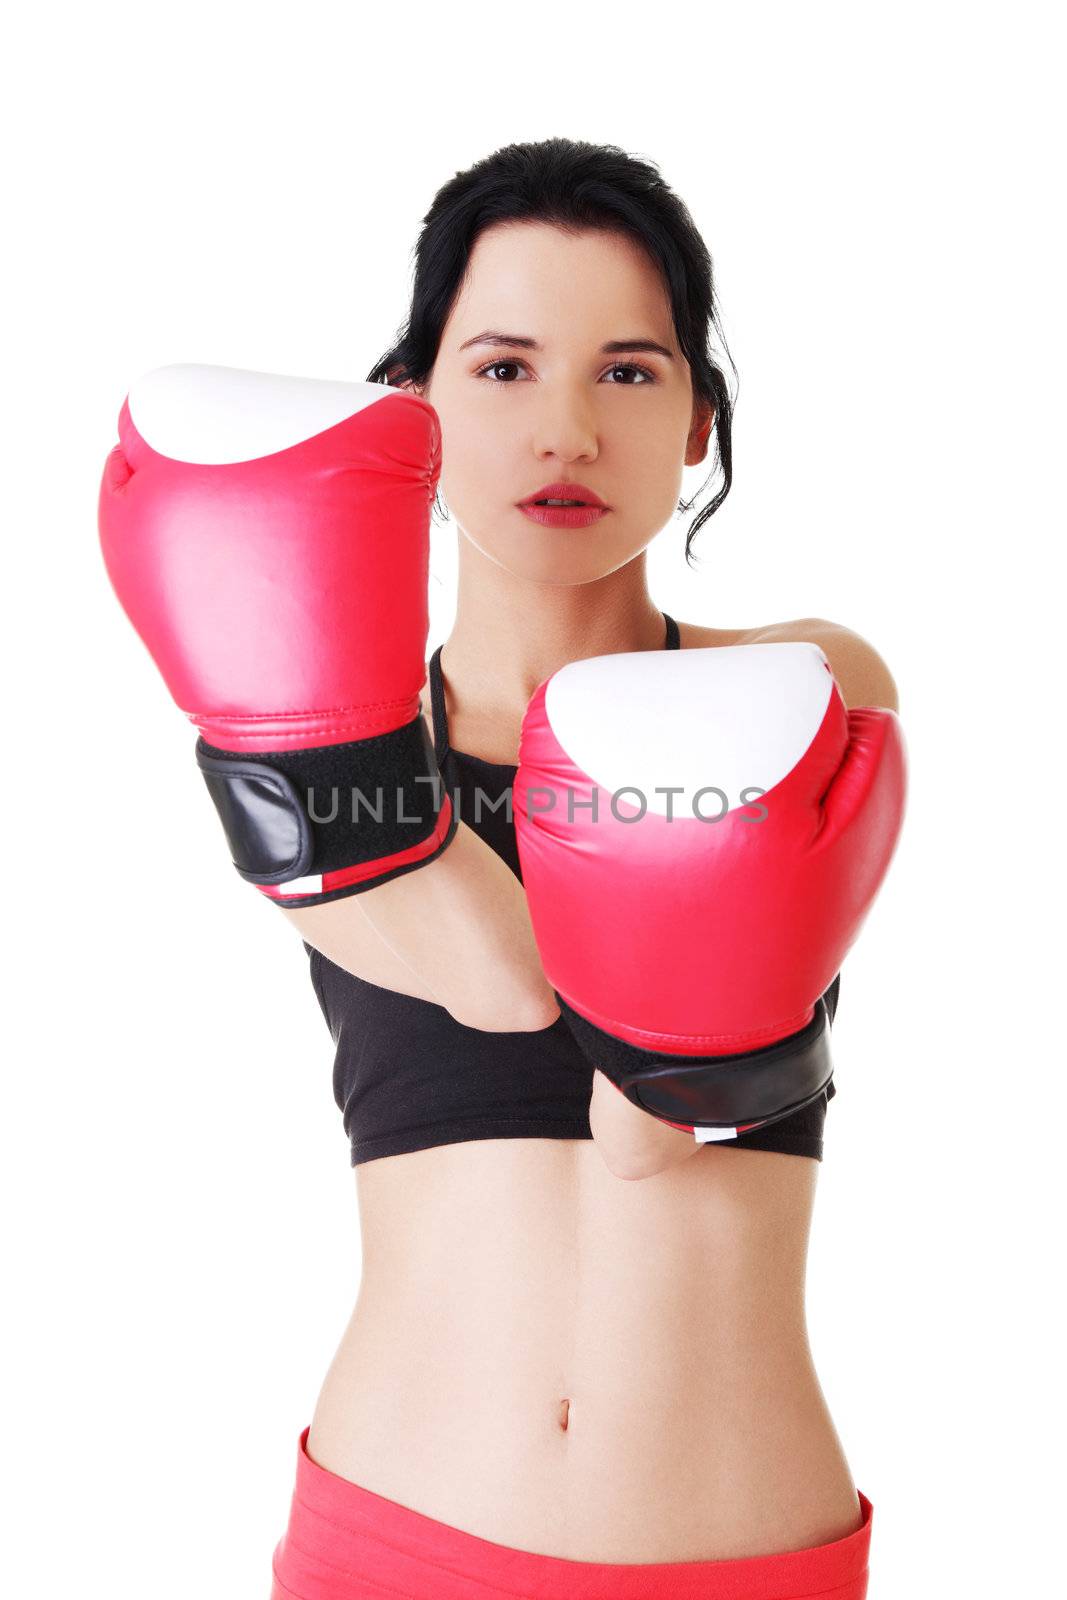 Boxing fitness woman wearing red boxing gloves. Isolated on white.